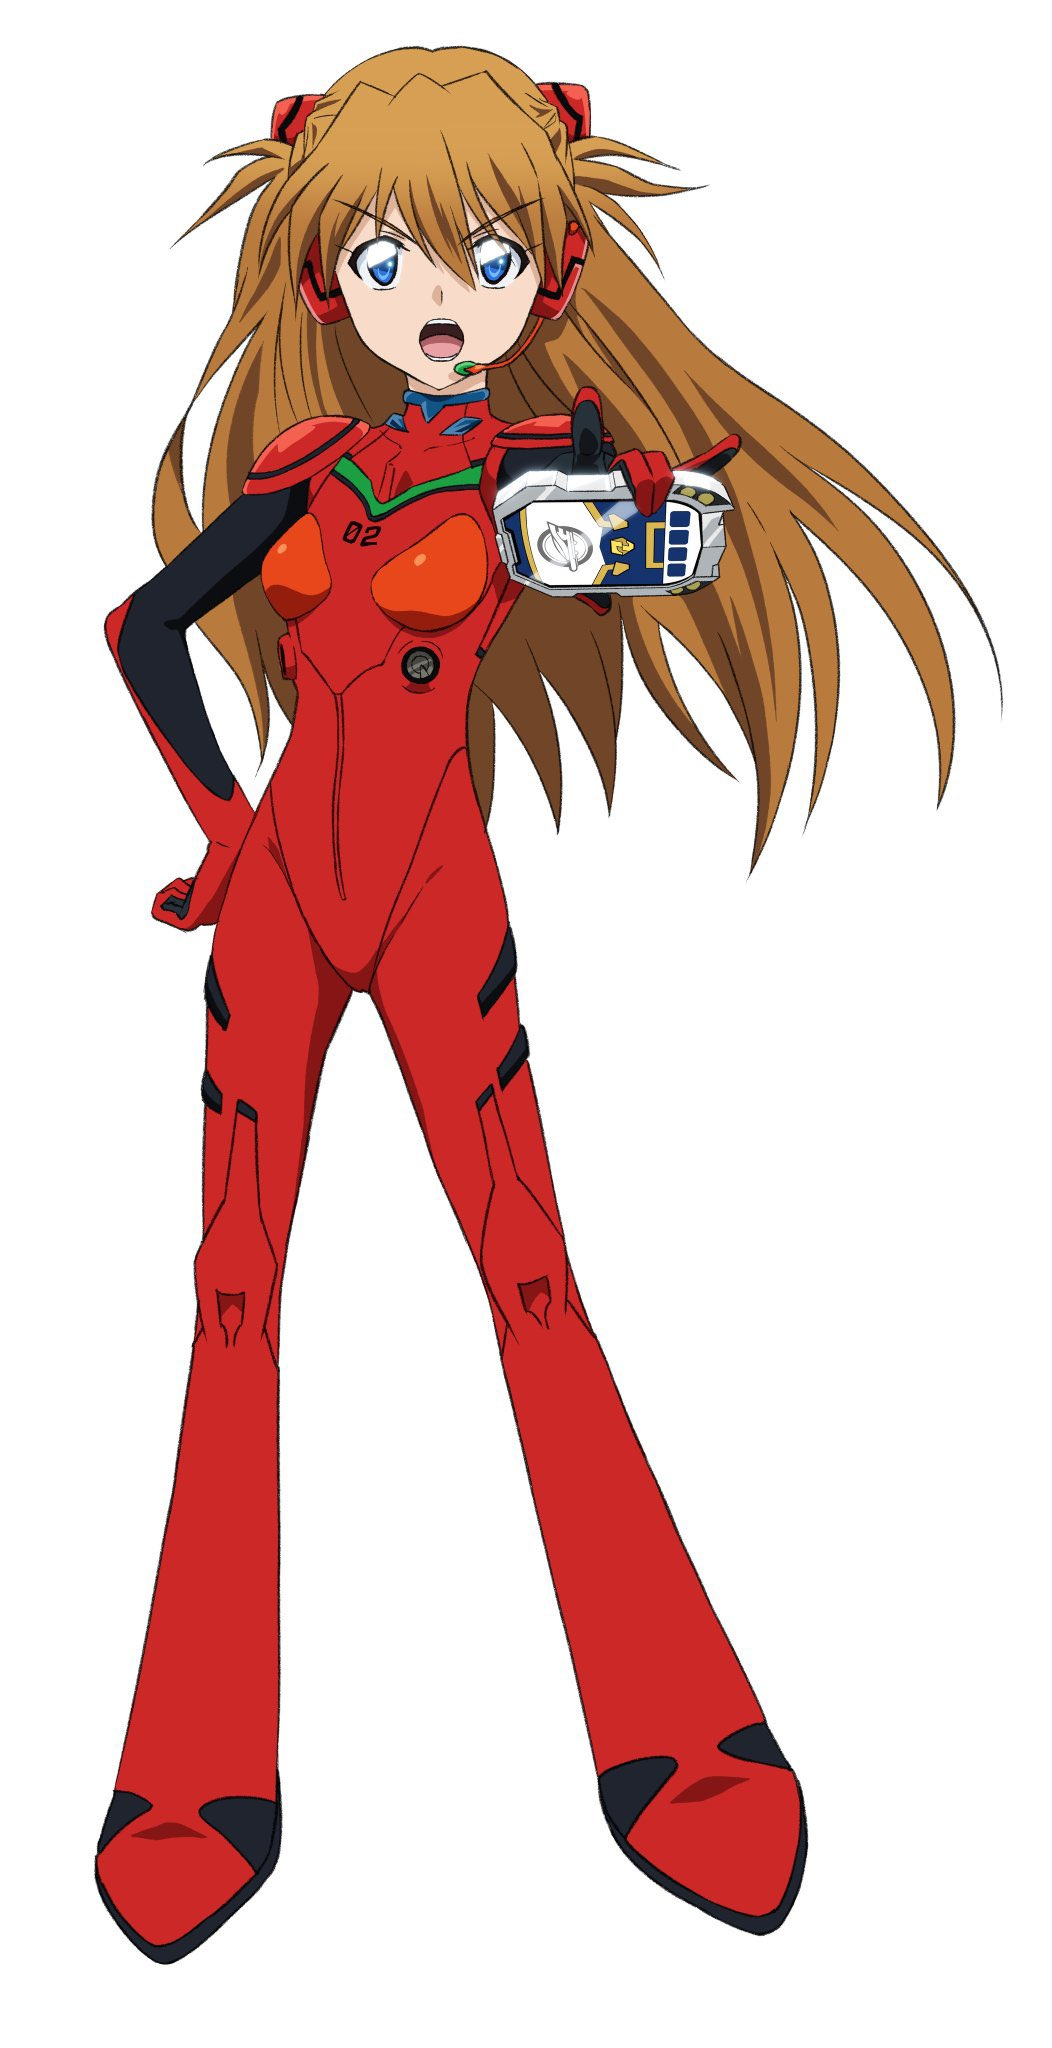 Seiyuu - Seiyuu X anime Character Asuka Langley Sohryu CV Yūko Miyamura  Asuka Langley Sohryu is a 14-year-old fictional character from the Neon  Genesis Evangelion franchise and one of the main female